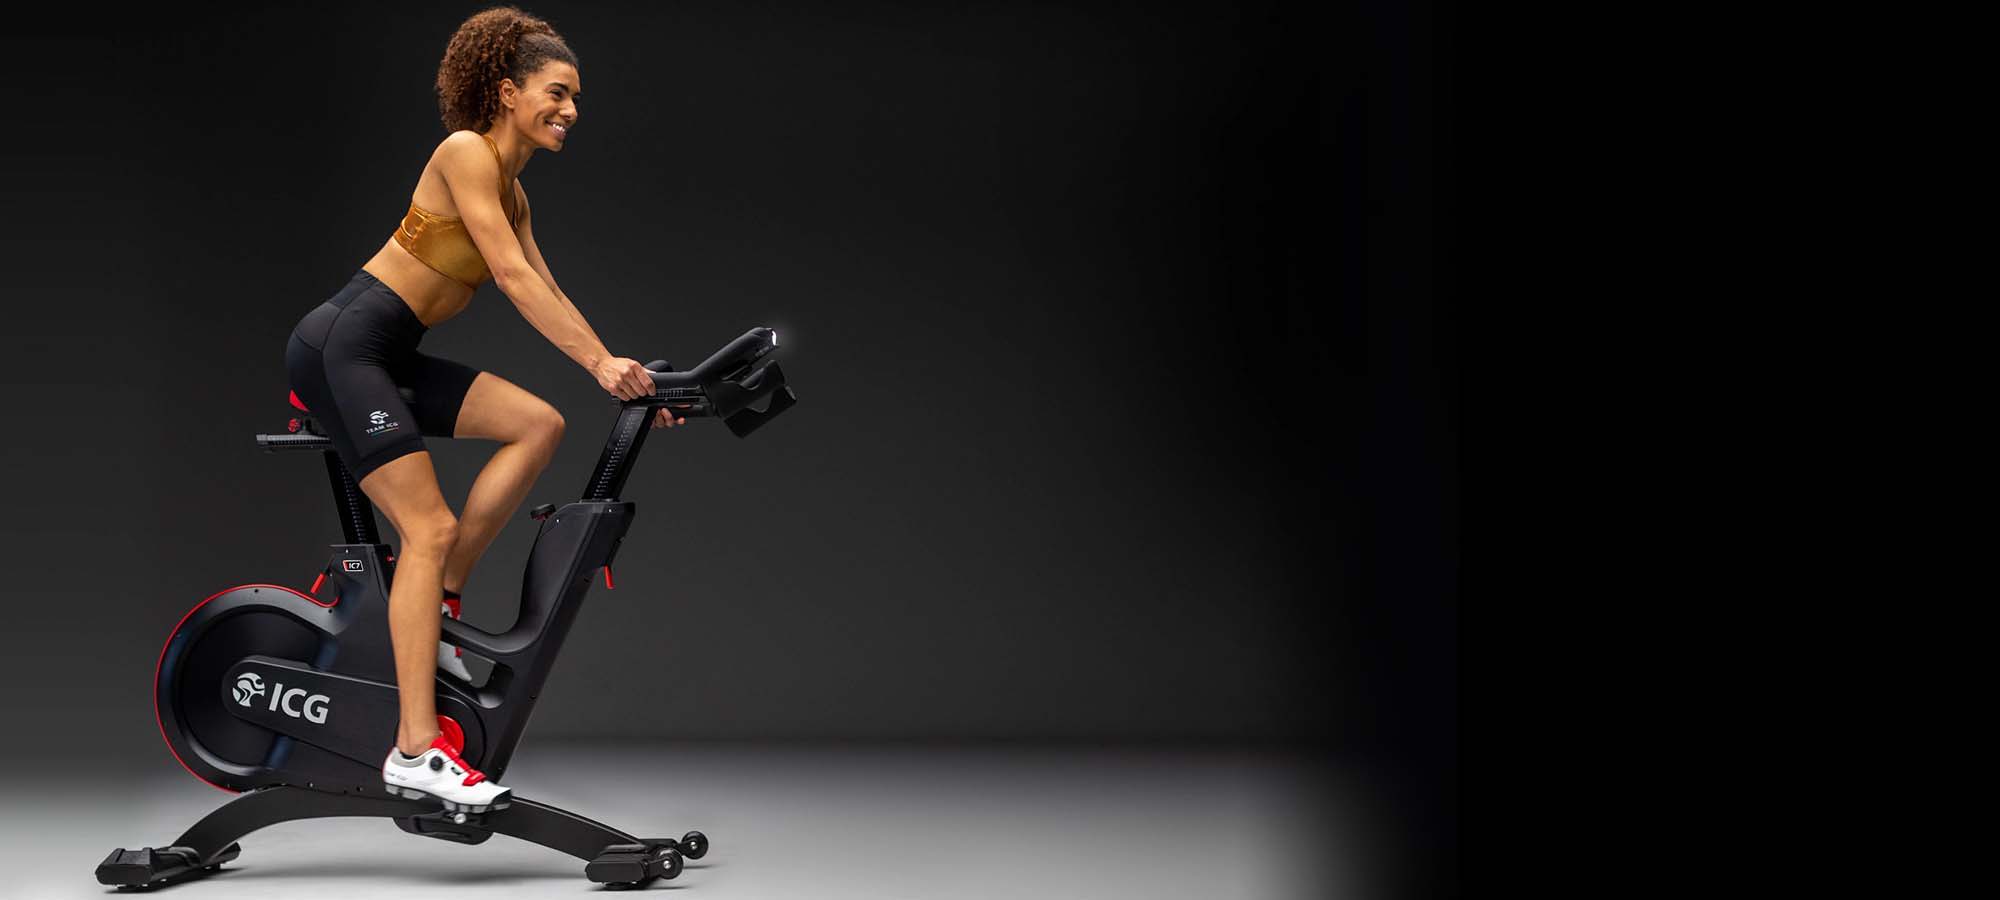 Female riding IC7 Indoor Cycle